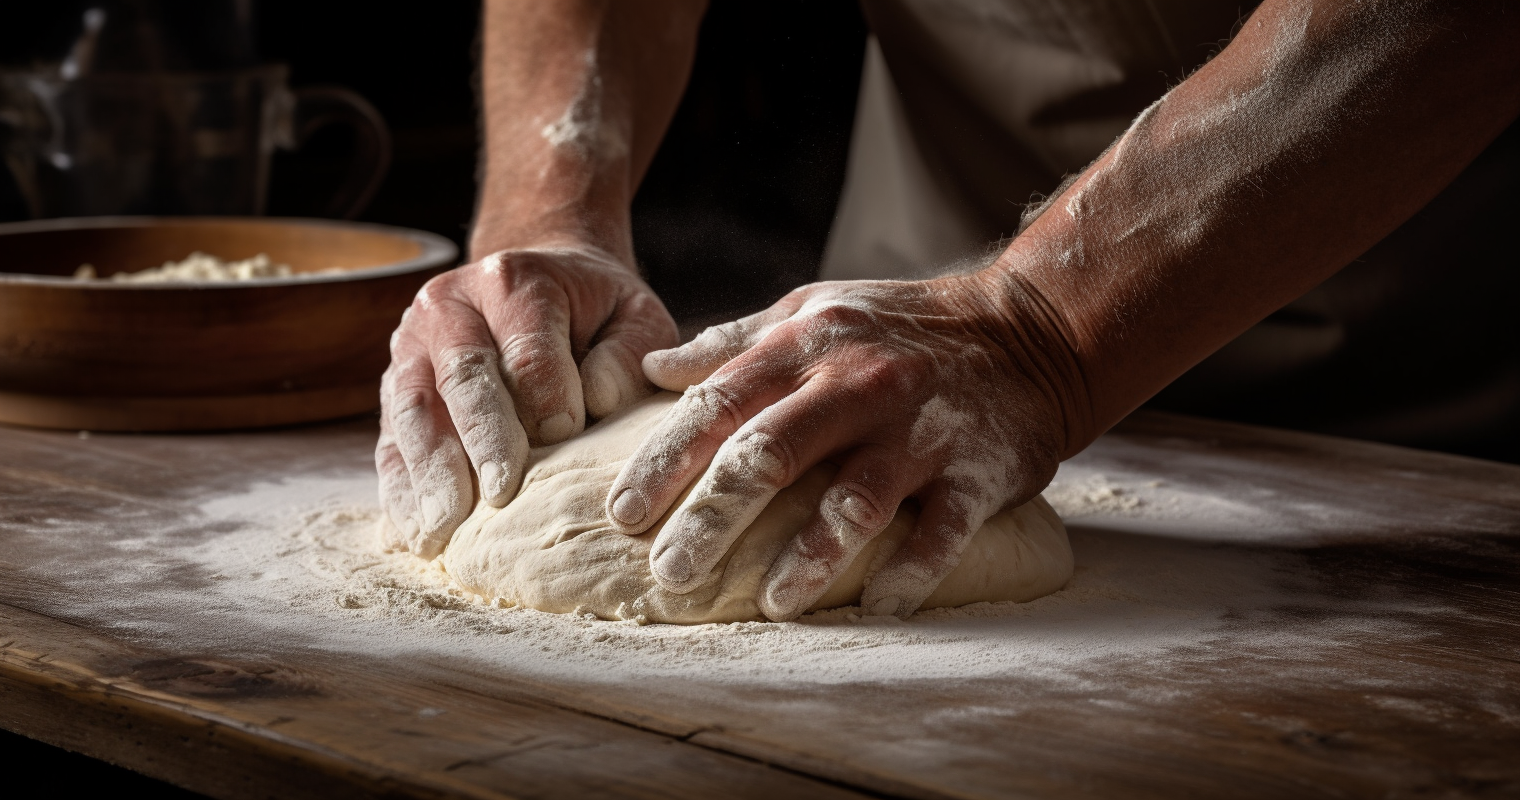 A baker skillfully rolling dough with a bench scraper